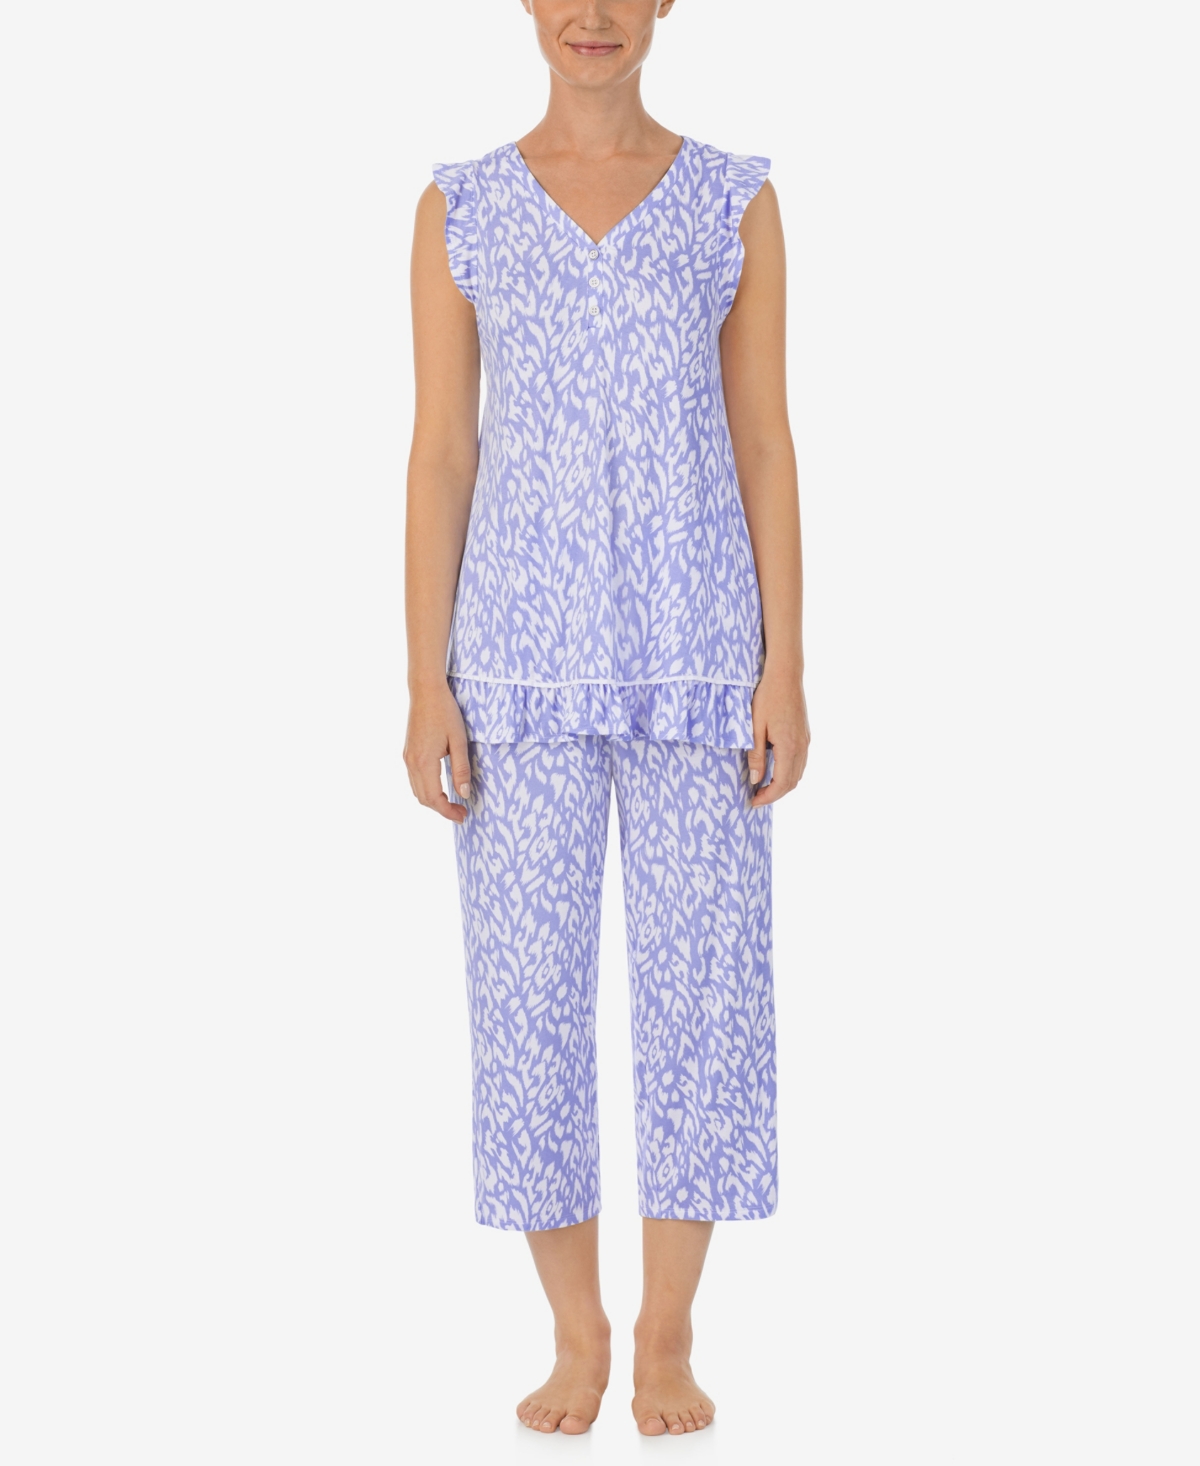 Shop Ellen Tracy Women's Sleeveless Top And Cropped Pants 2-pc. Pajama Set In Peri Animal